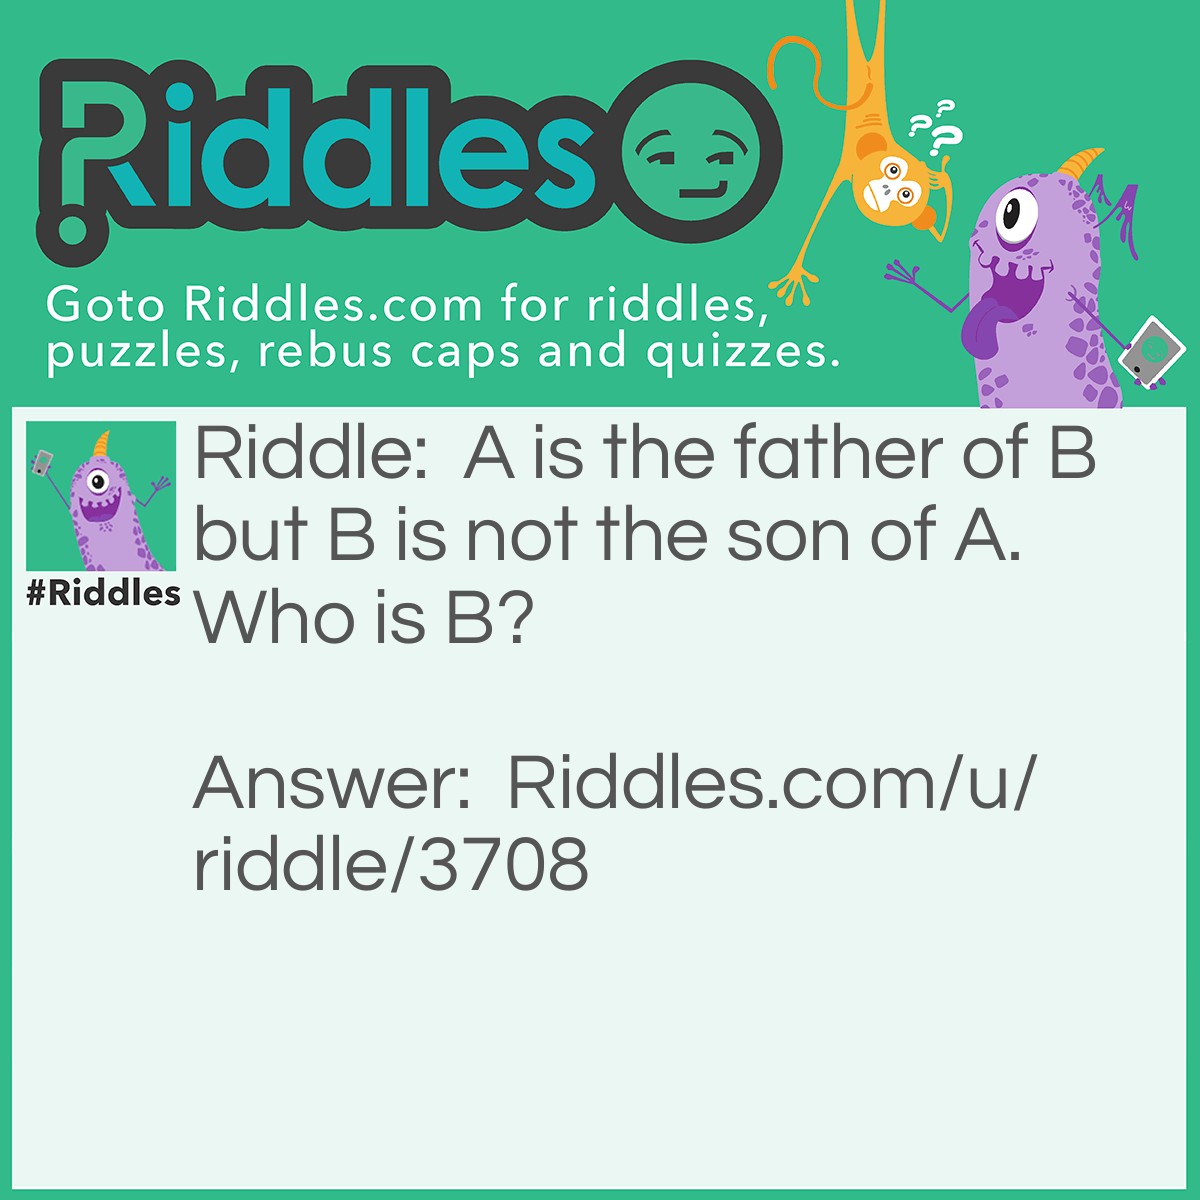 Riddle: A is the father of B but B is not the son of A. Who is B? Answer: The daughter.